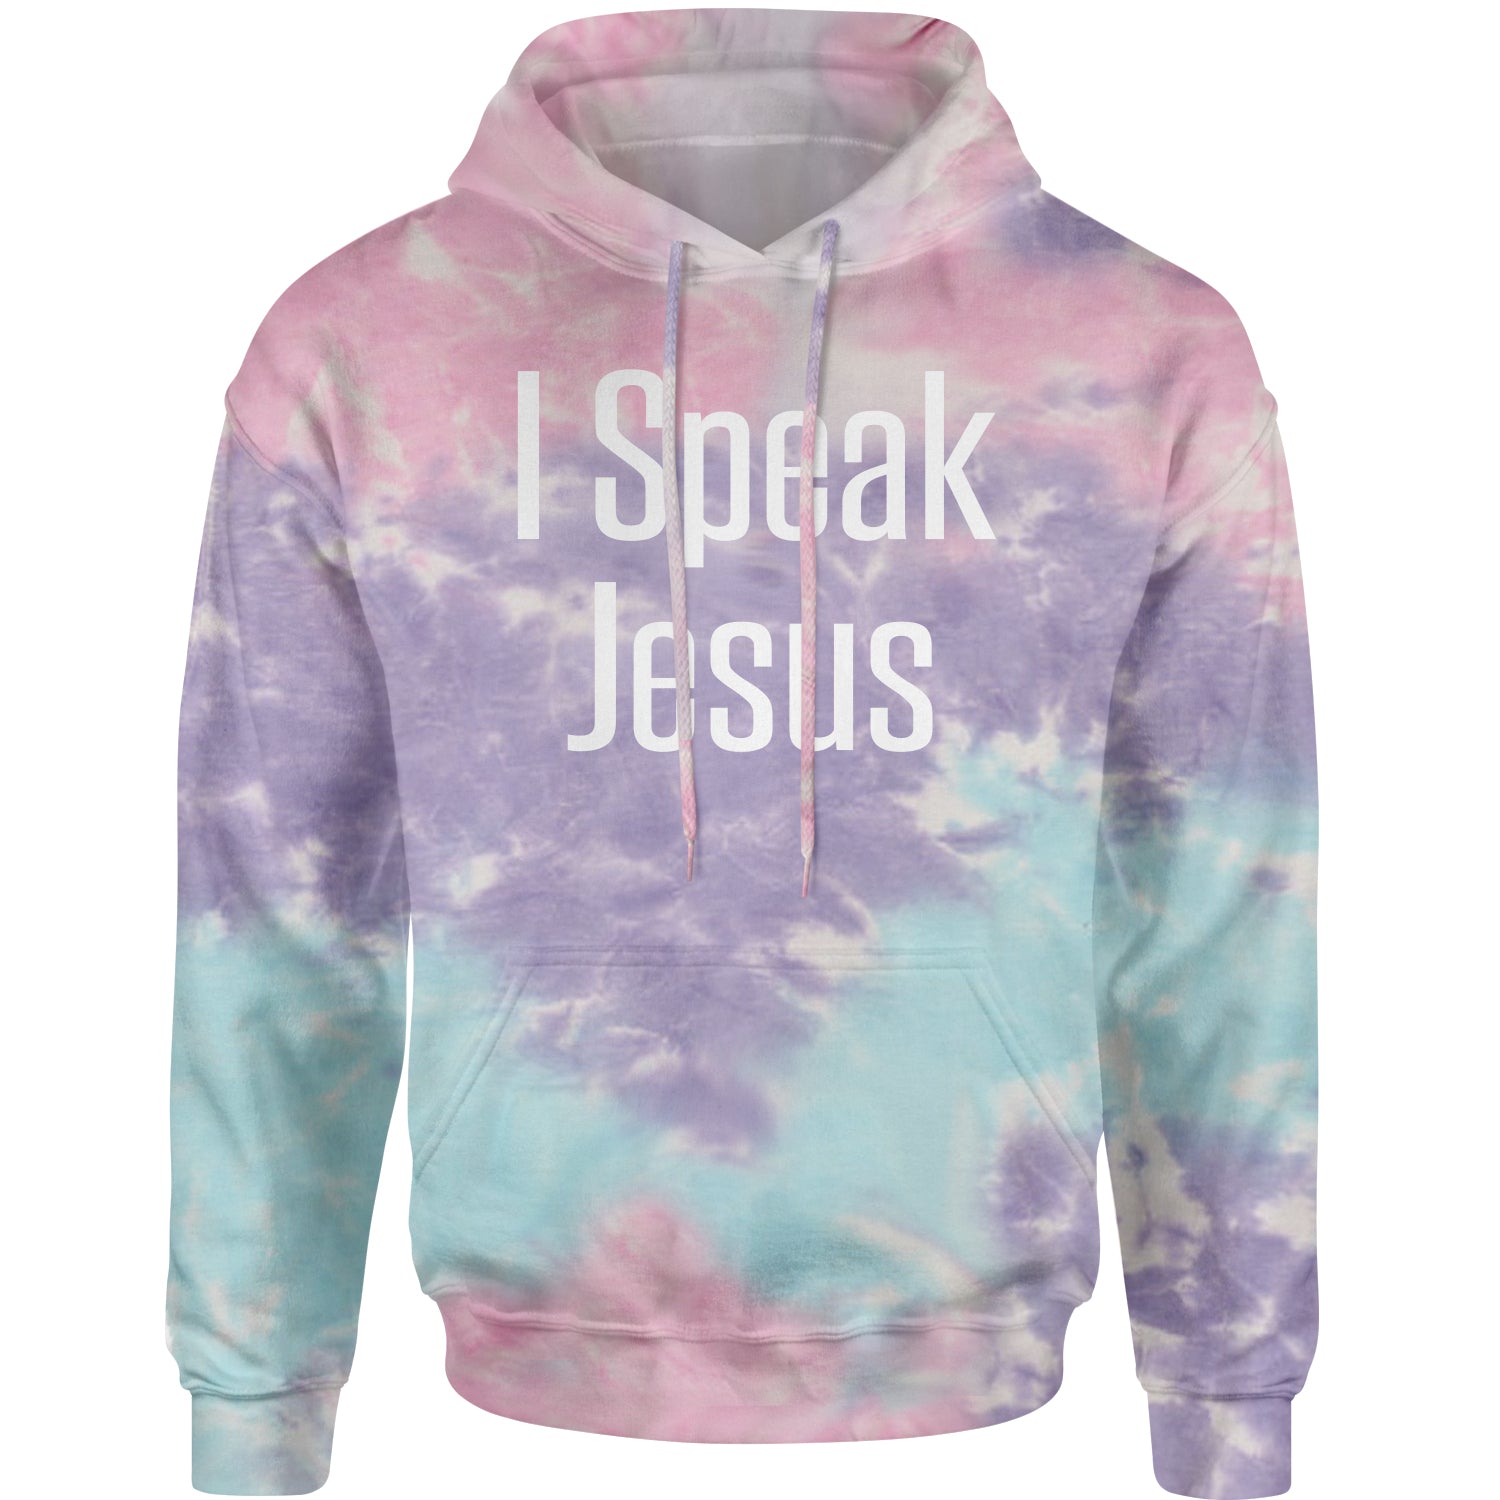 I Speak Jesus Adult Hoodie Sweatshirt catholic, charity, christ, christian, christianity, city, concert, gayle, heaven, in, maverick, only, praise, scars, worship by Expression Tees